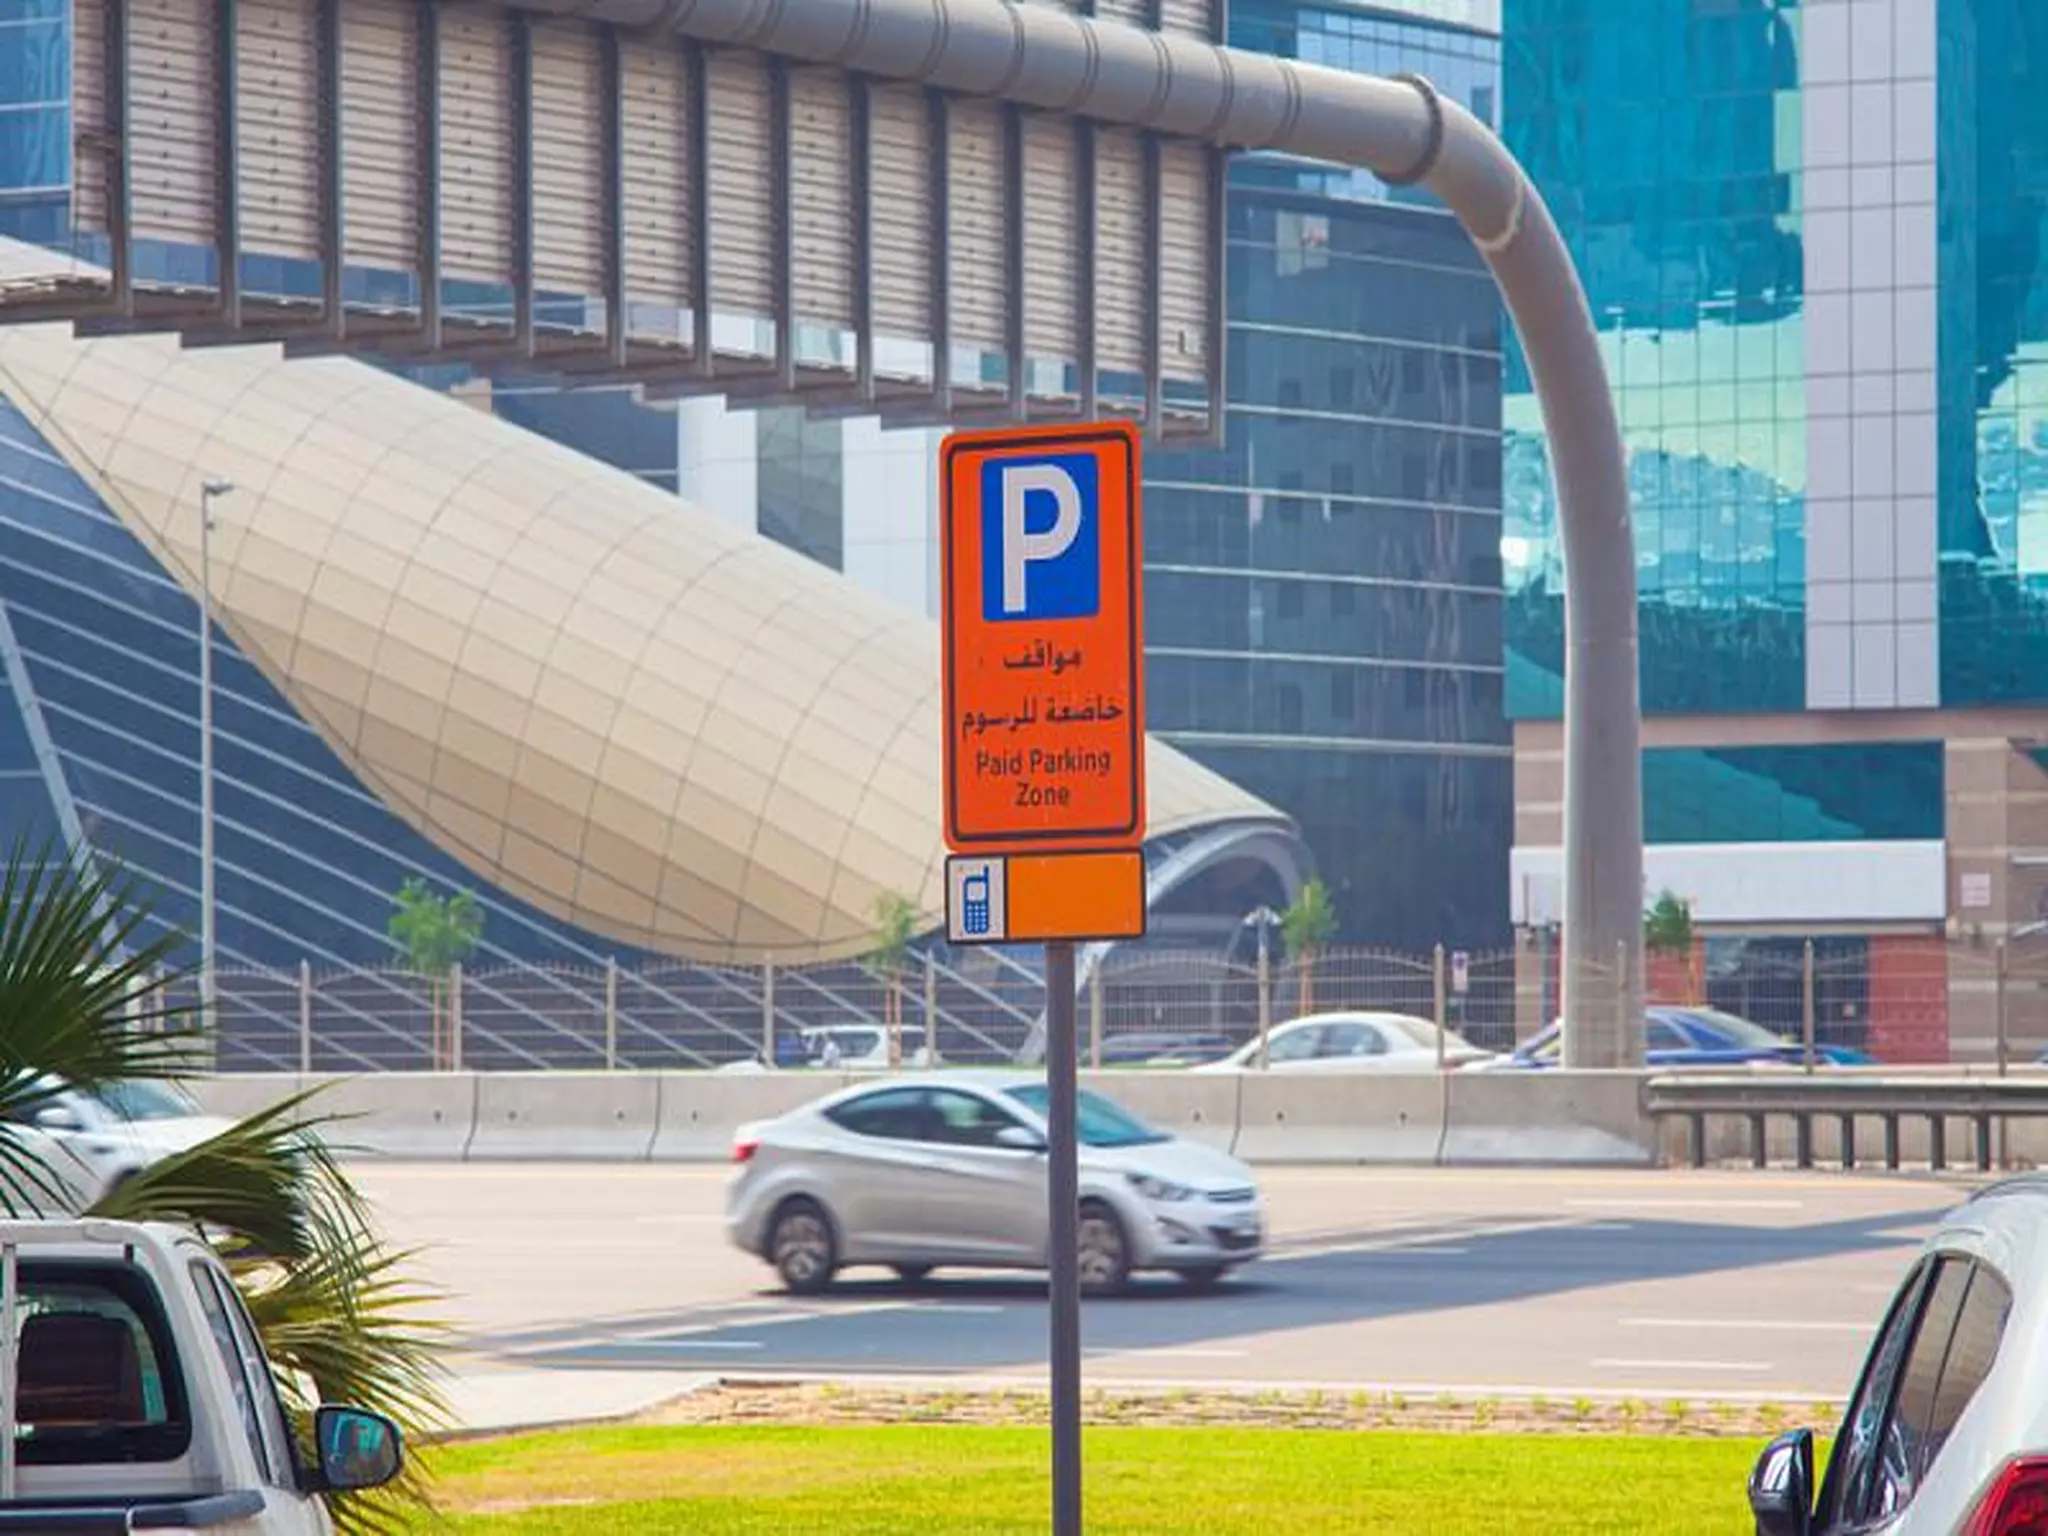 emirates announces free parking on the occasion of Eid Al Fitr